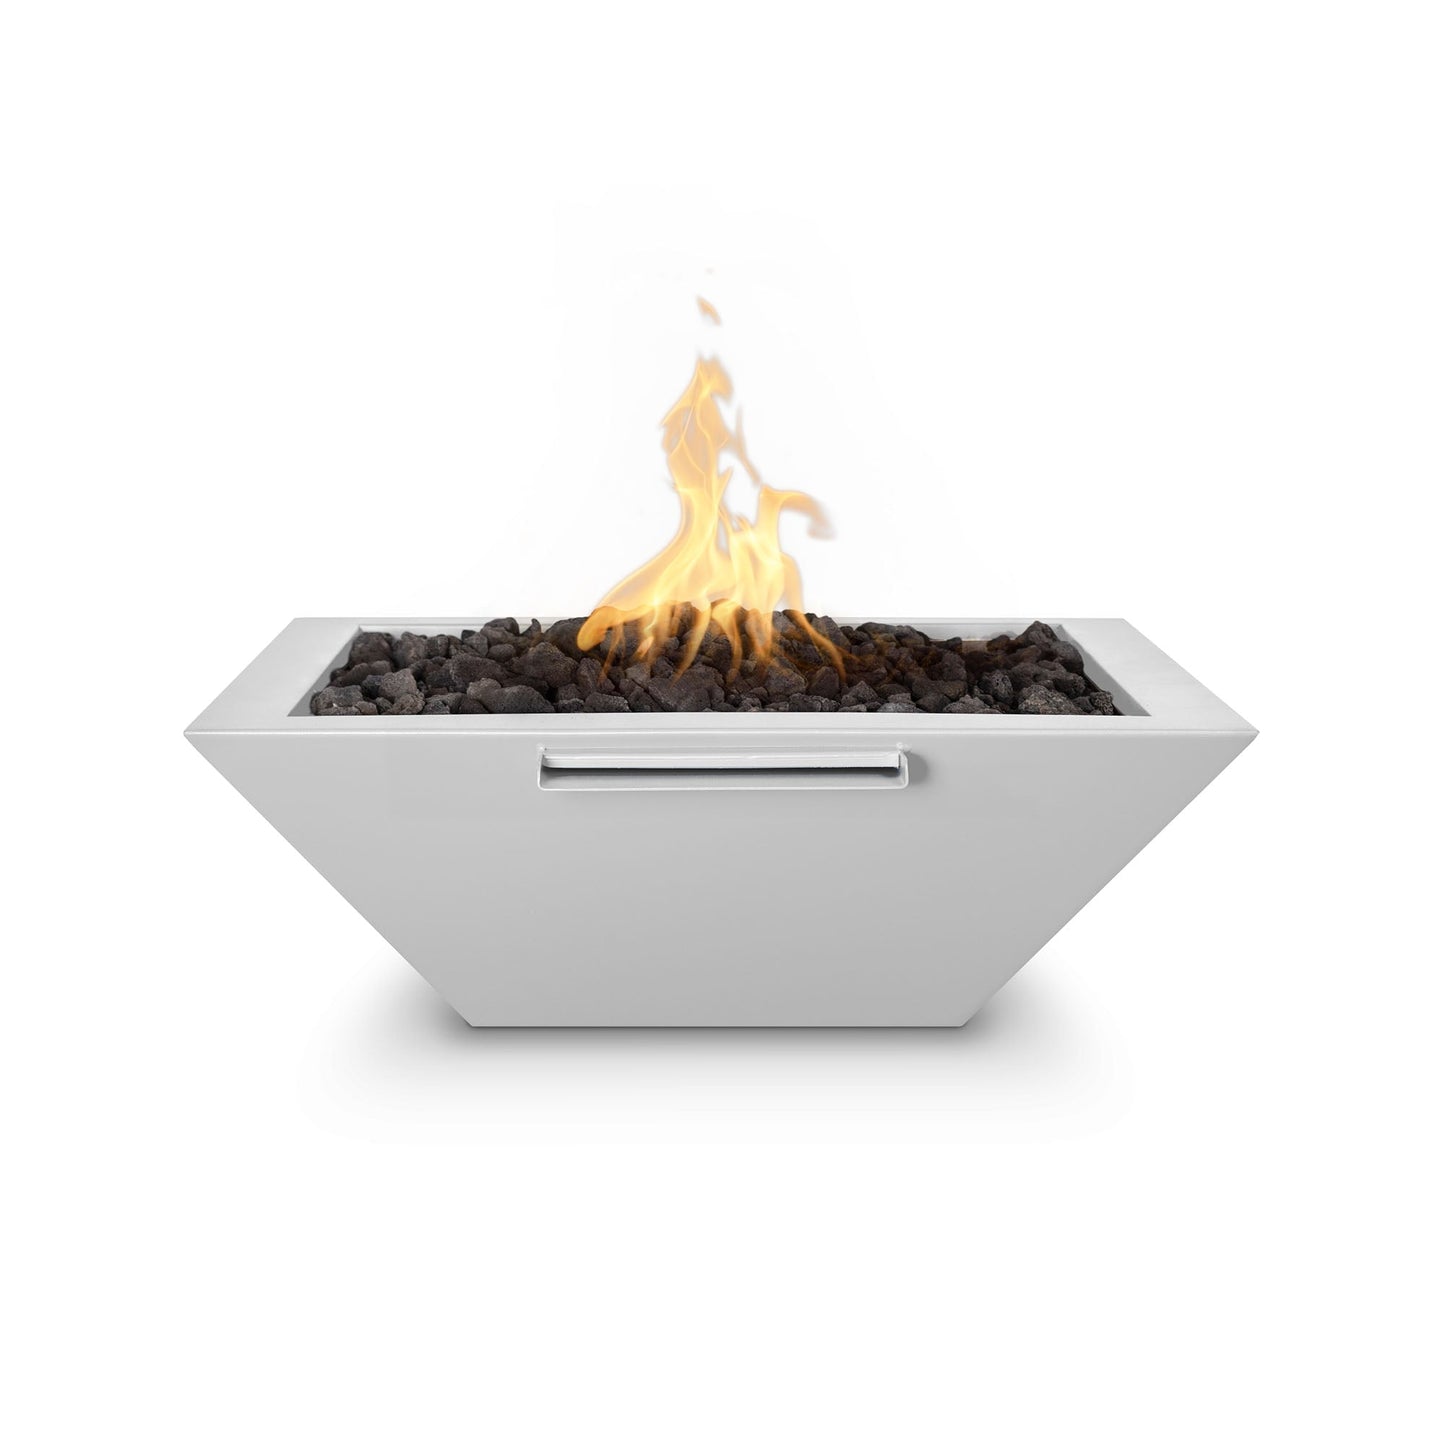 The Outdoor Plus Square Maya 36" Black Powder Coated Metal Liquid Propane Fire Bowl with Match Lit with Flame Sense Ignition